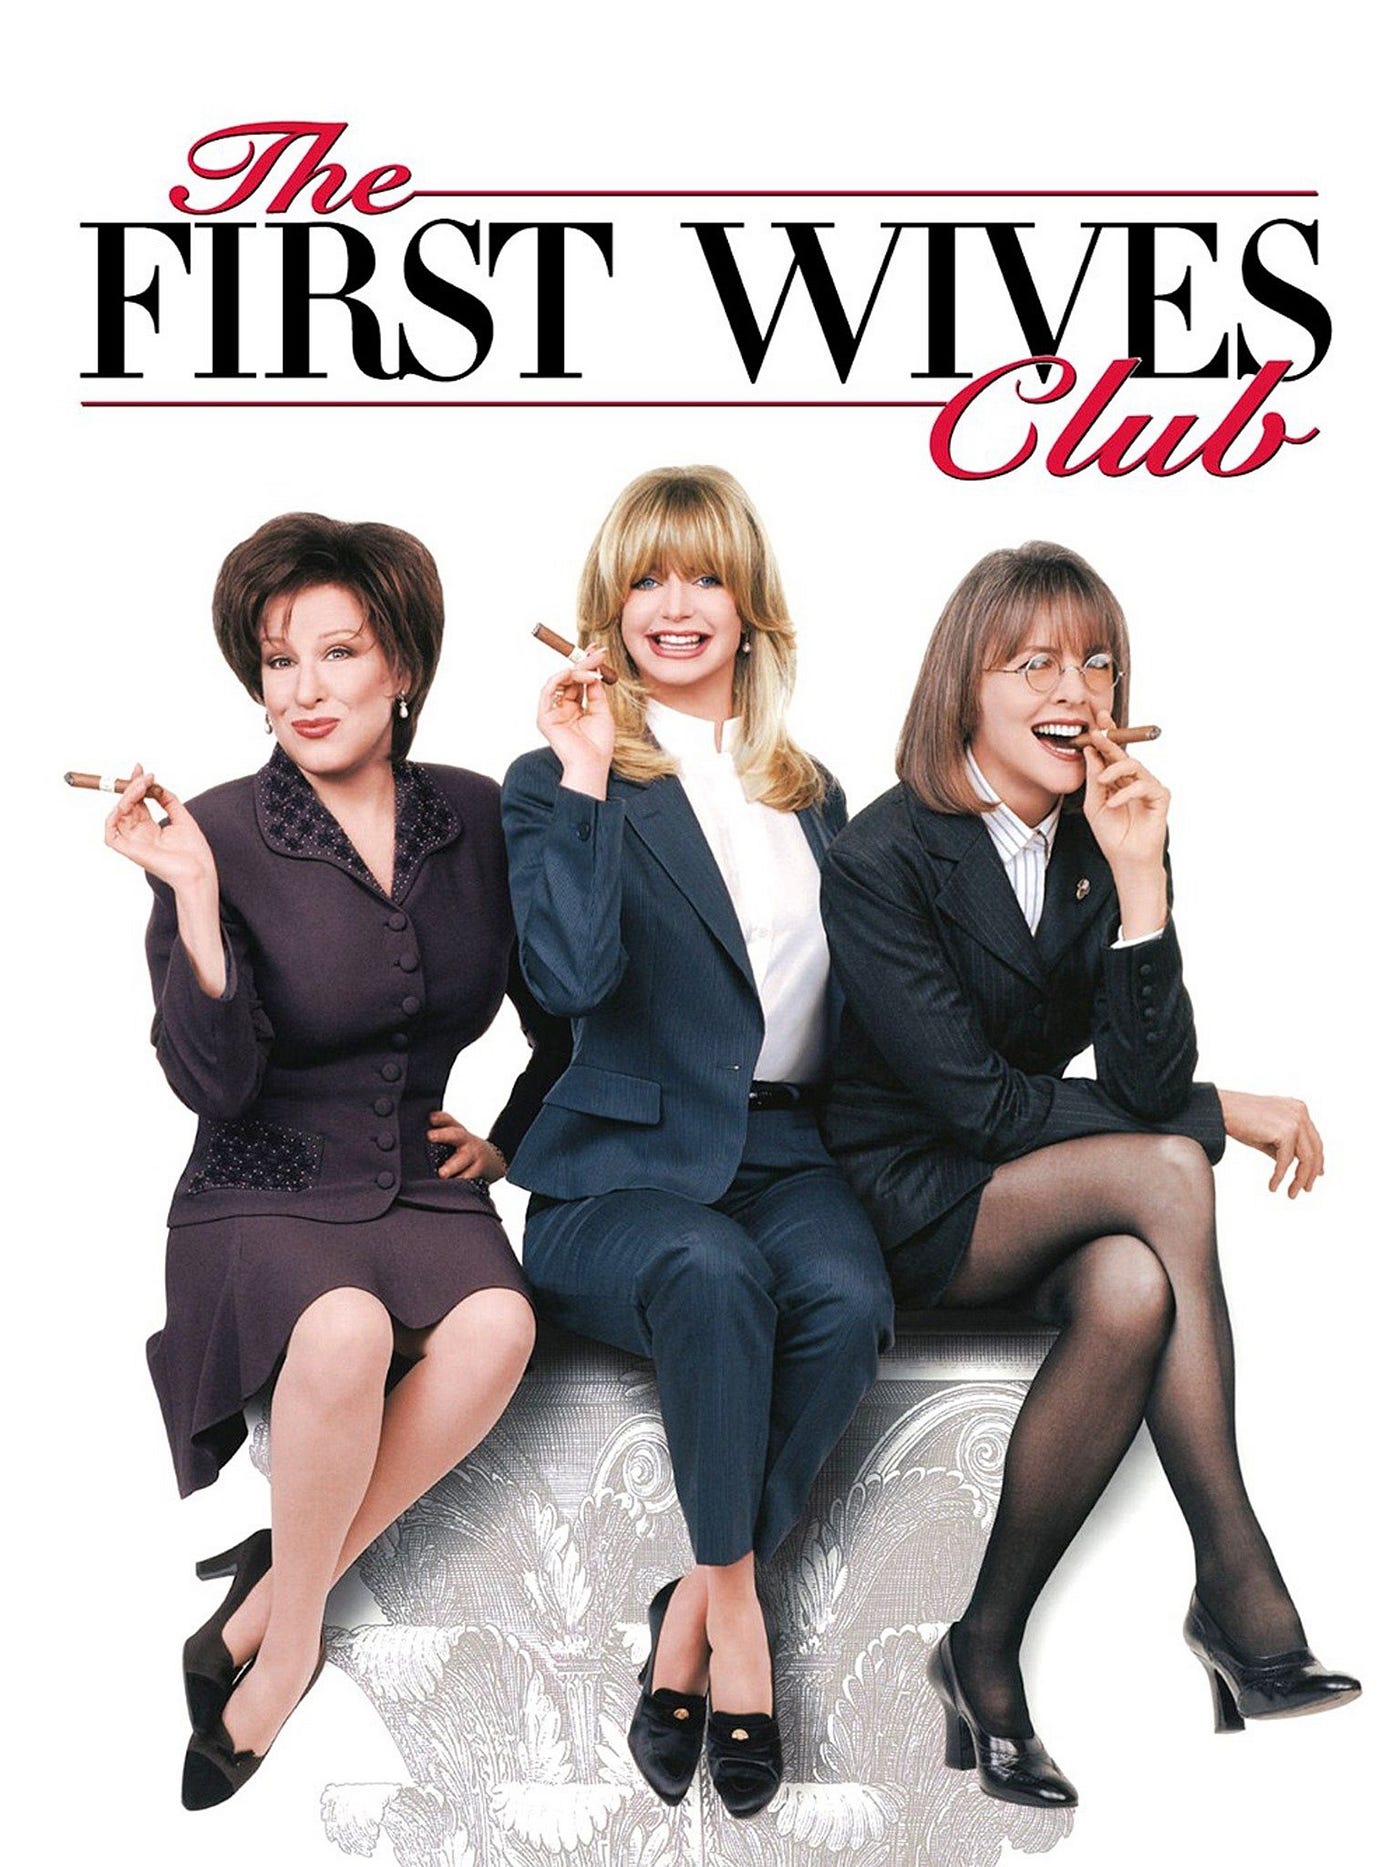 The First Wives Club” A Comedy Classic Turns 25 by Richard Rants and Raves Medium photo